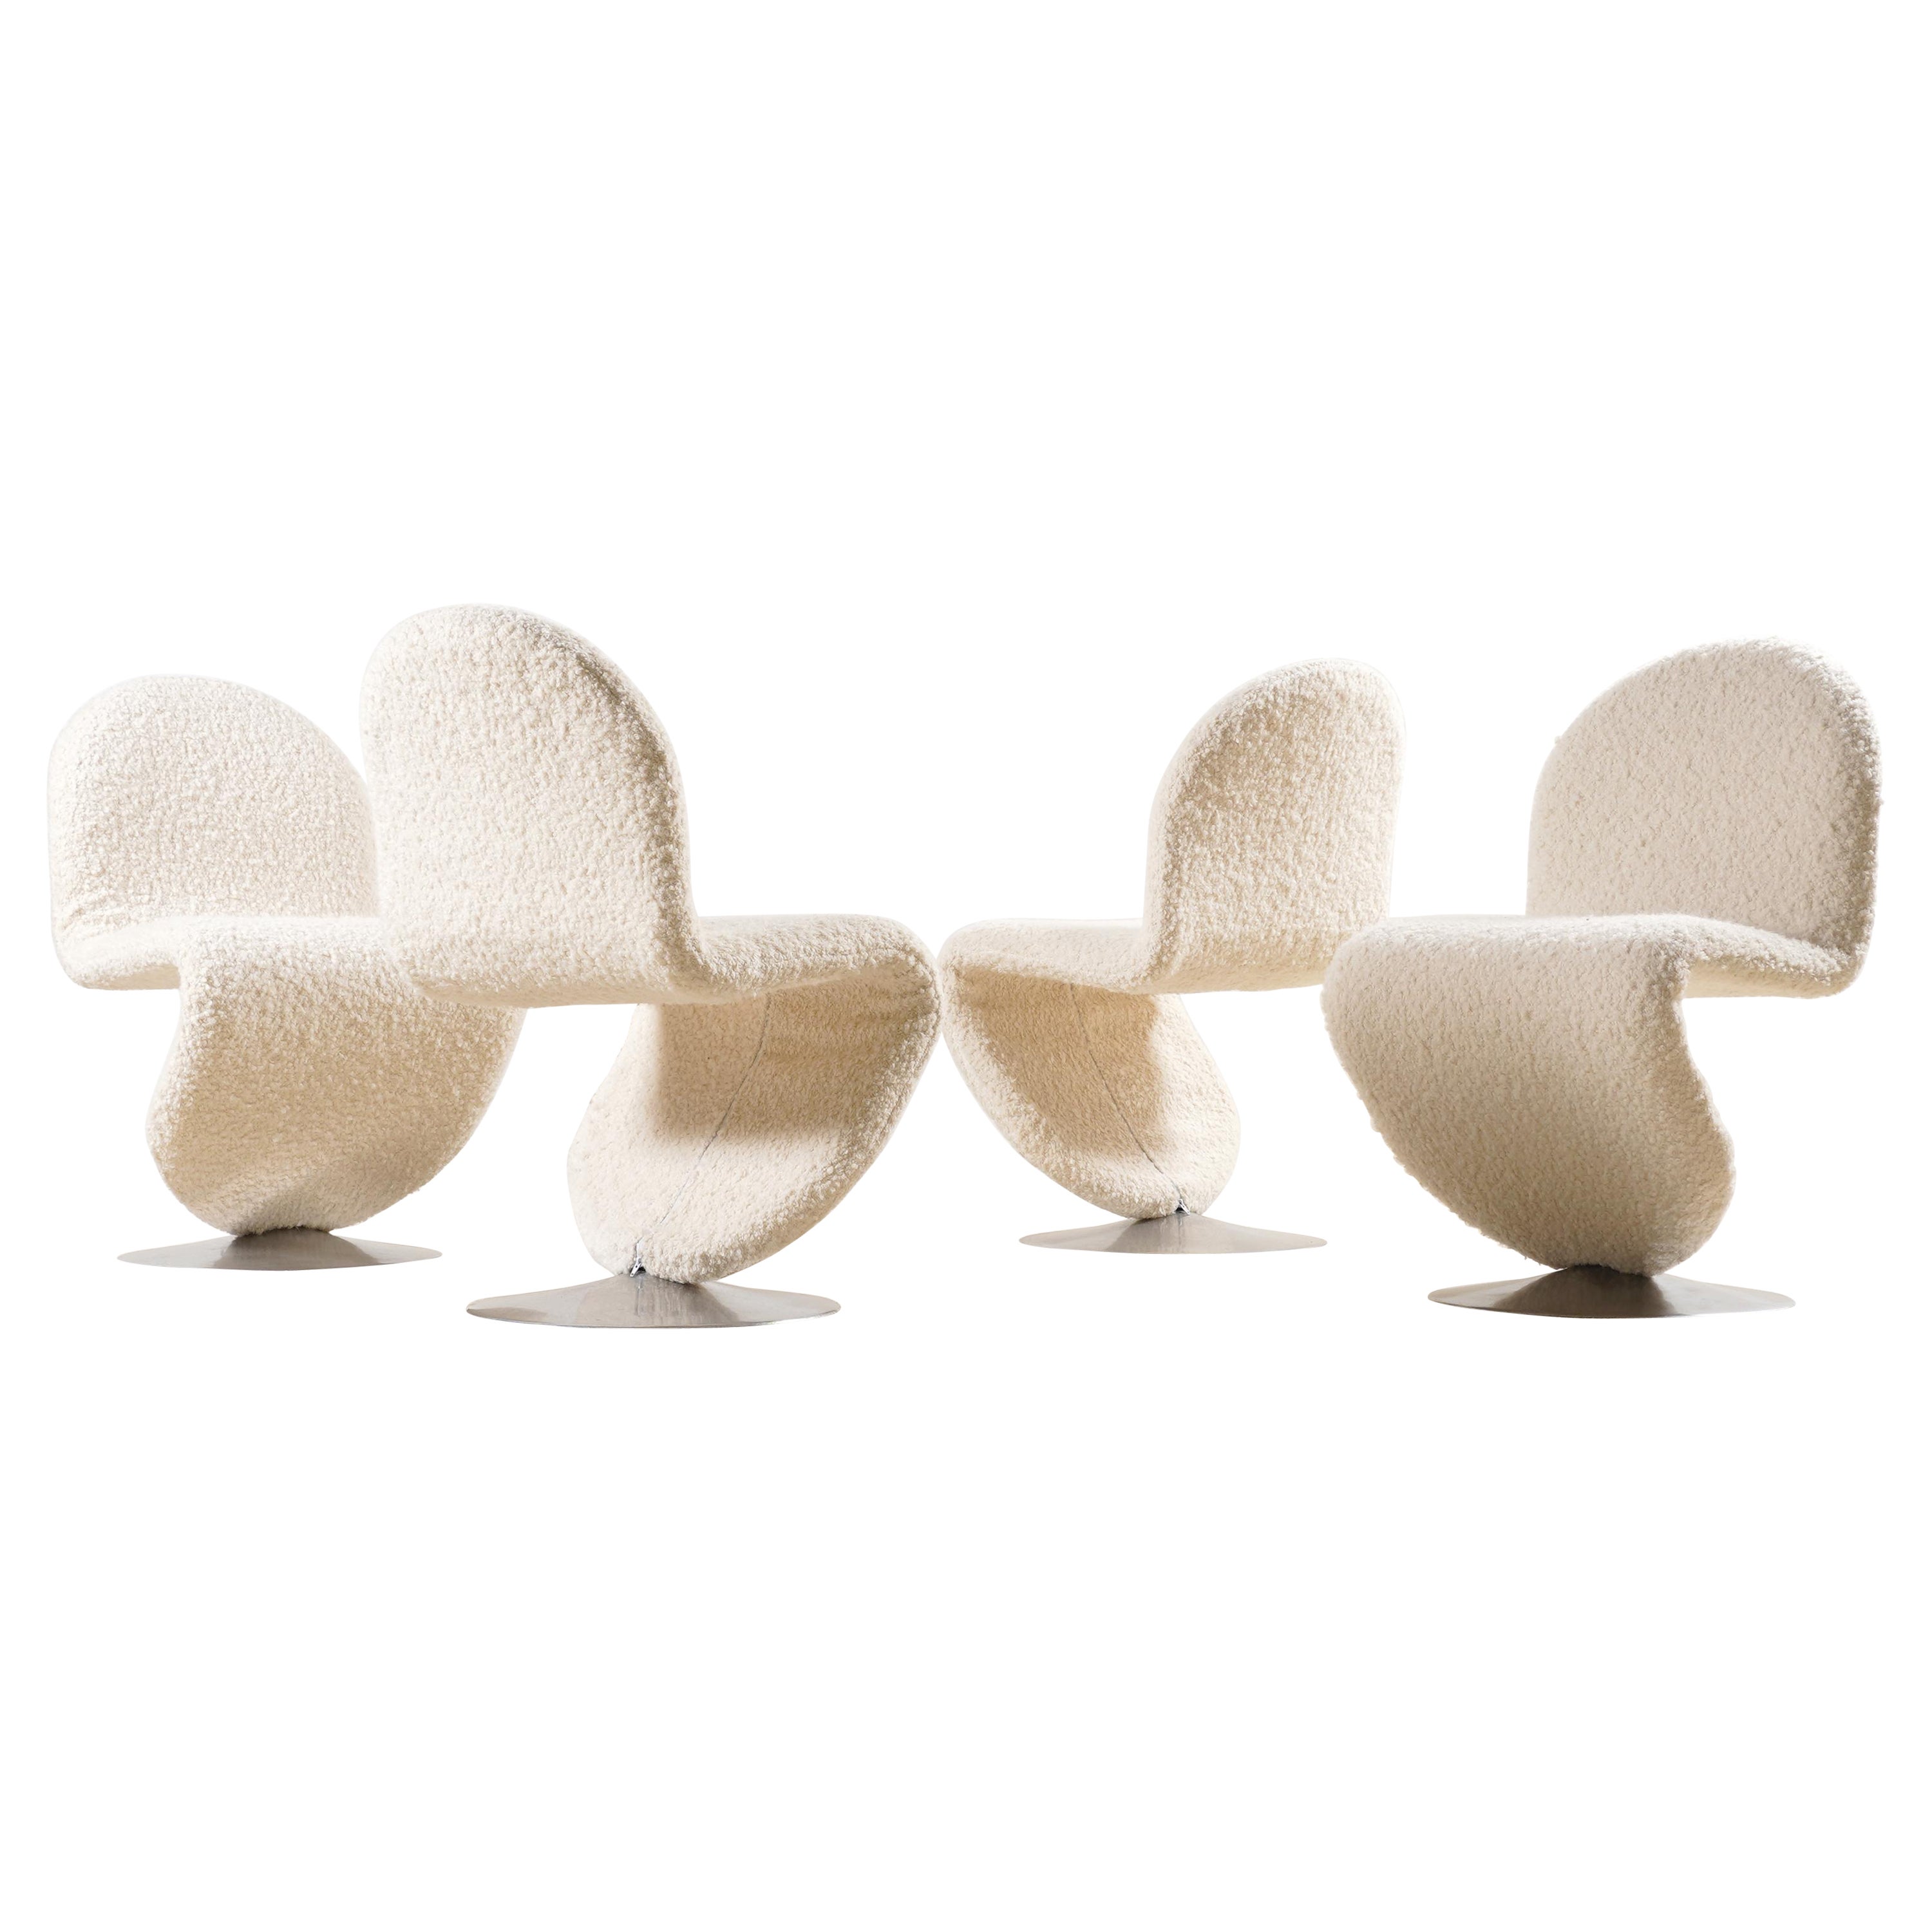 Verner Panton, Set of Four "A" Chairs "System 1-2-3" for Fritz Hansen, 1970s